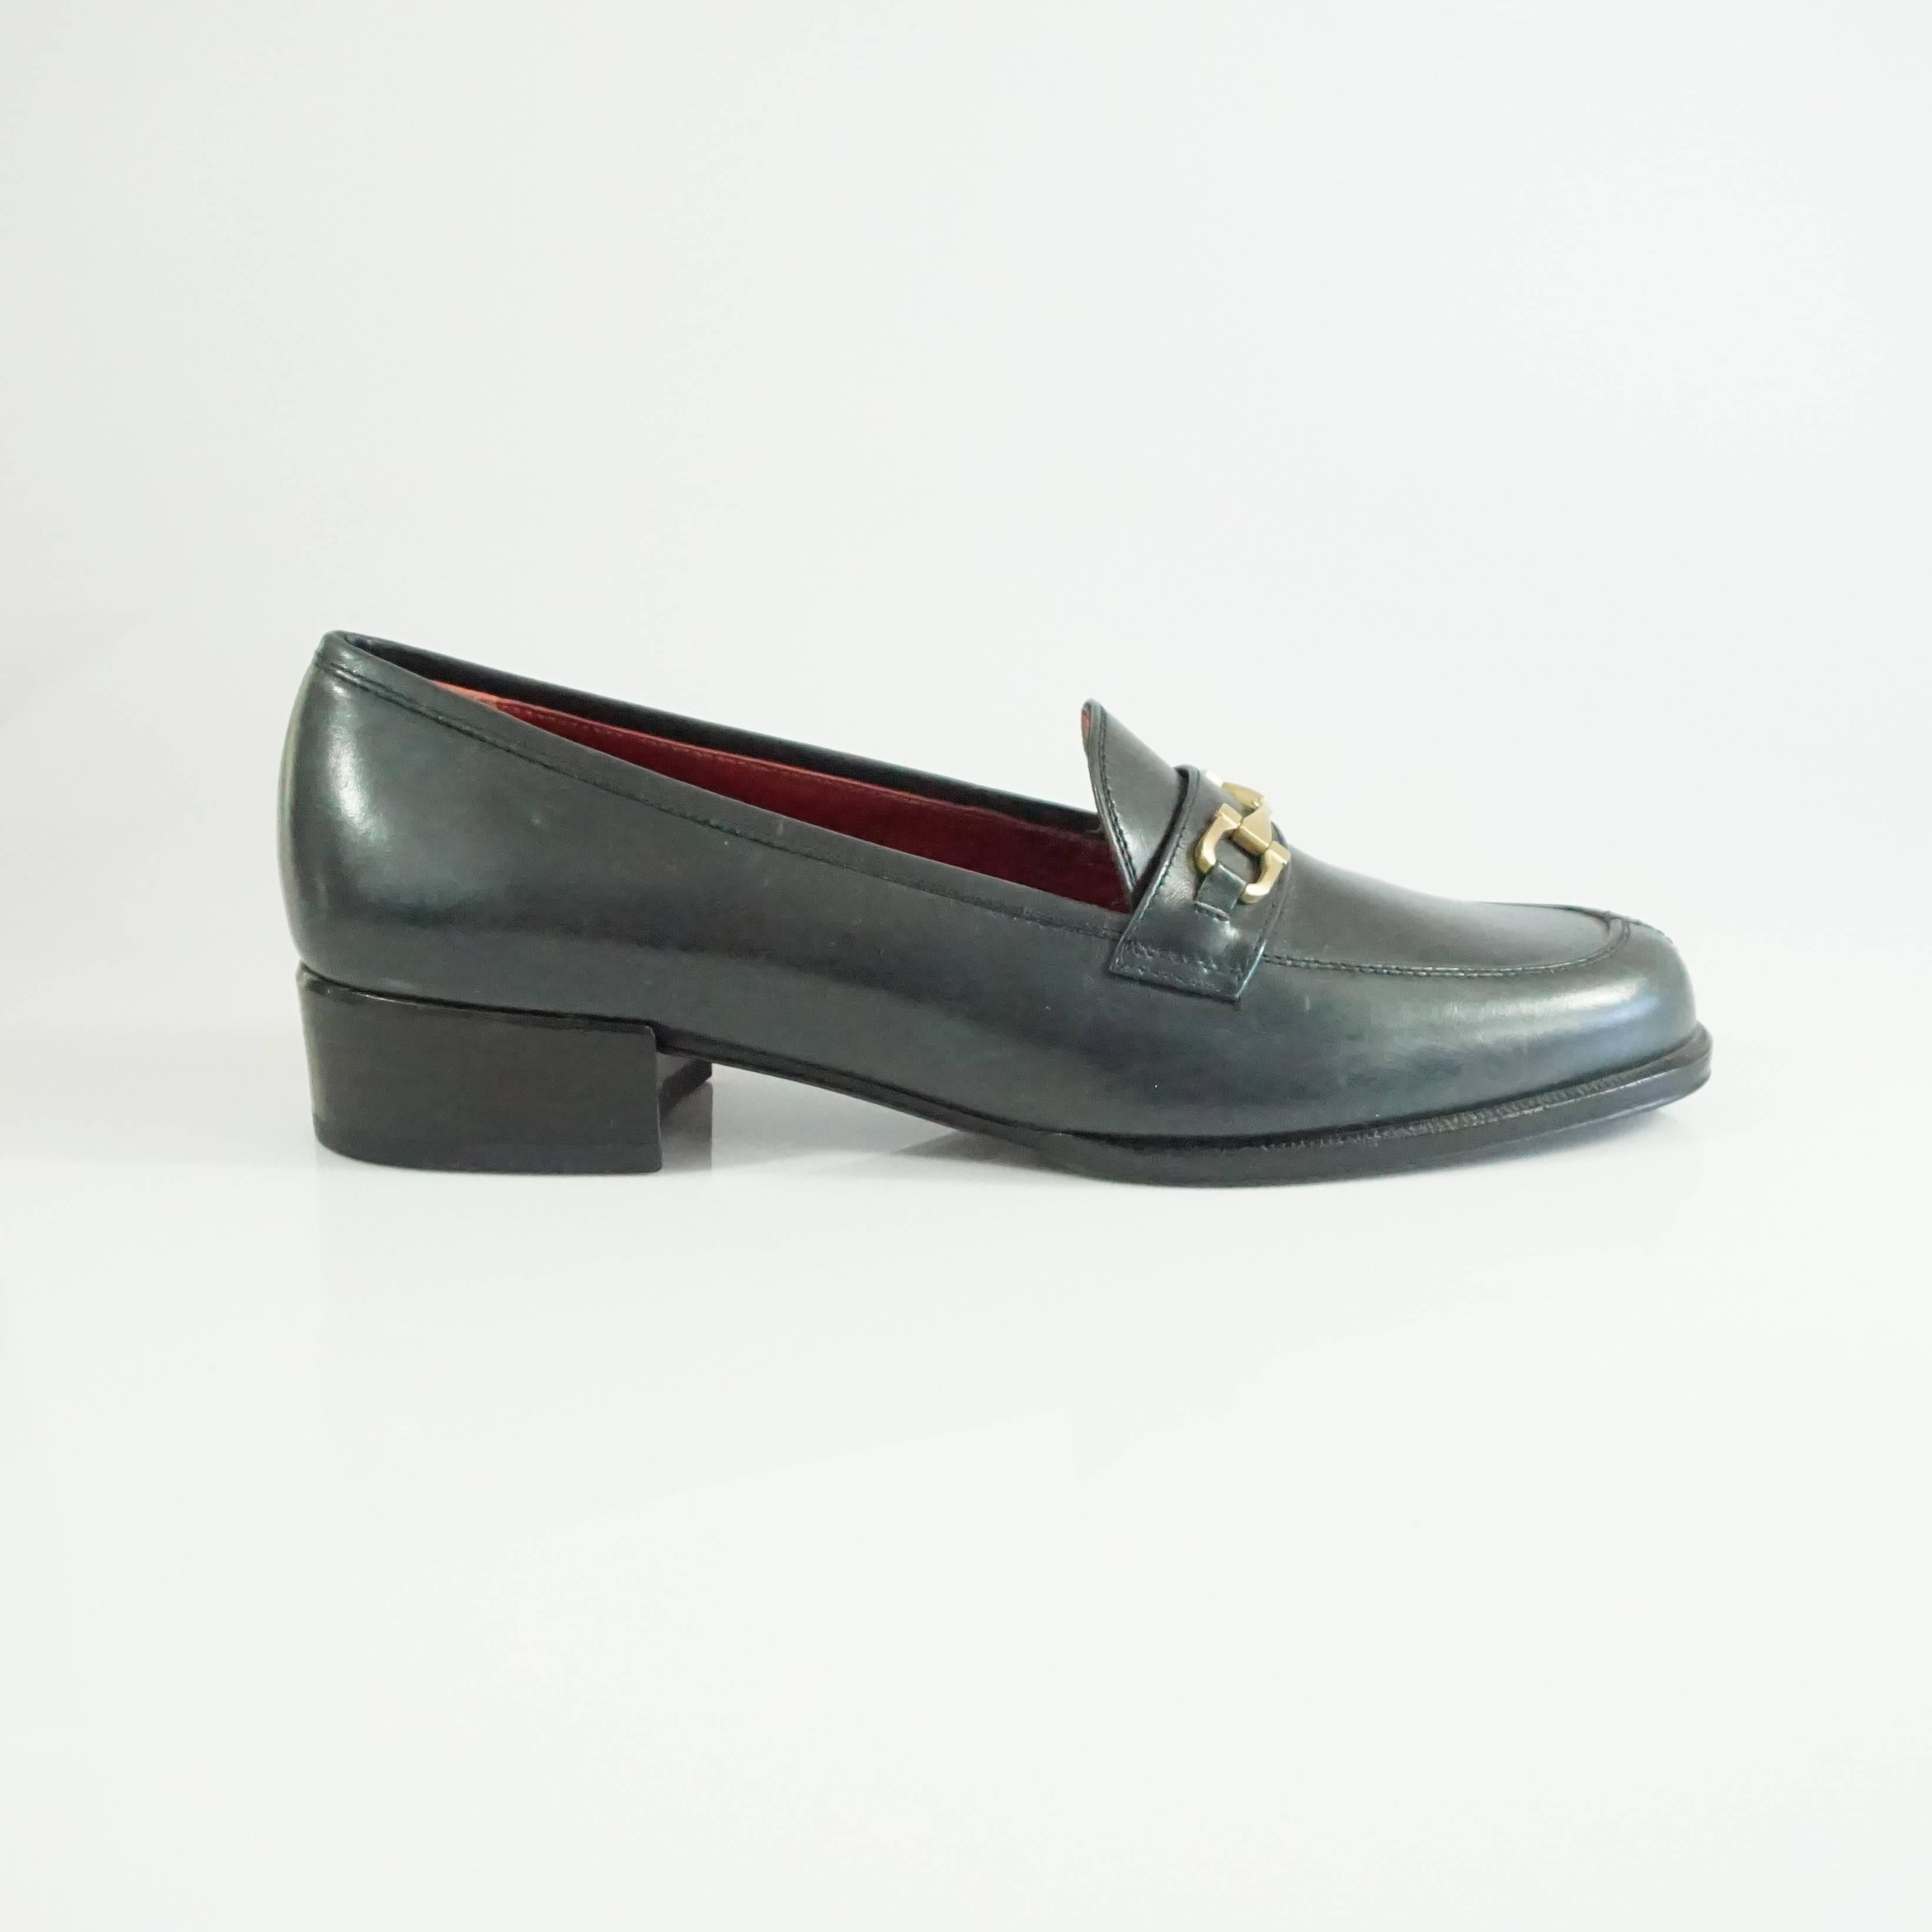 These Salvatore Ferragamo black leather loafers are a classic staple. They feature a soft leather material and a soft gold horse bit. The shoes are in good condition with some bottom wear and some scratches to the leather as seen in the last images.